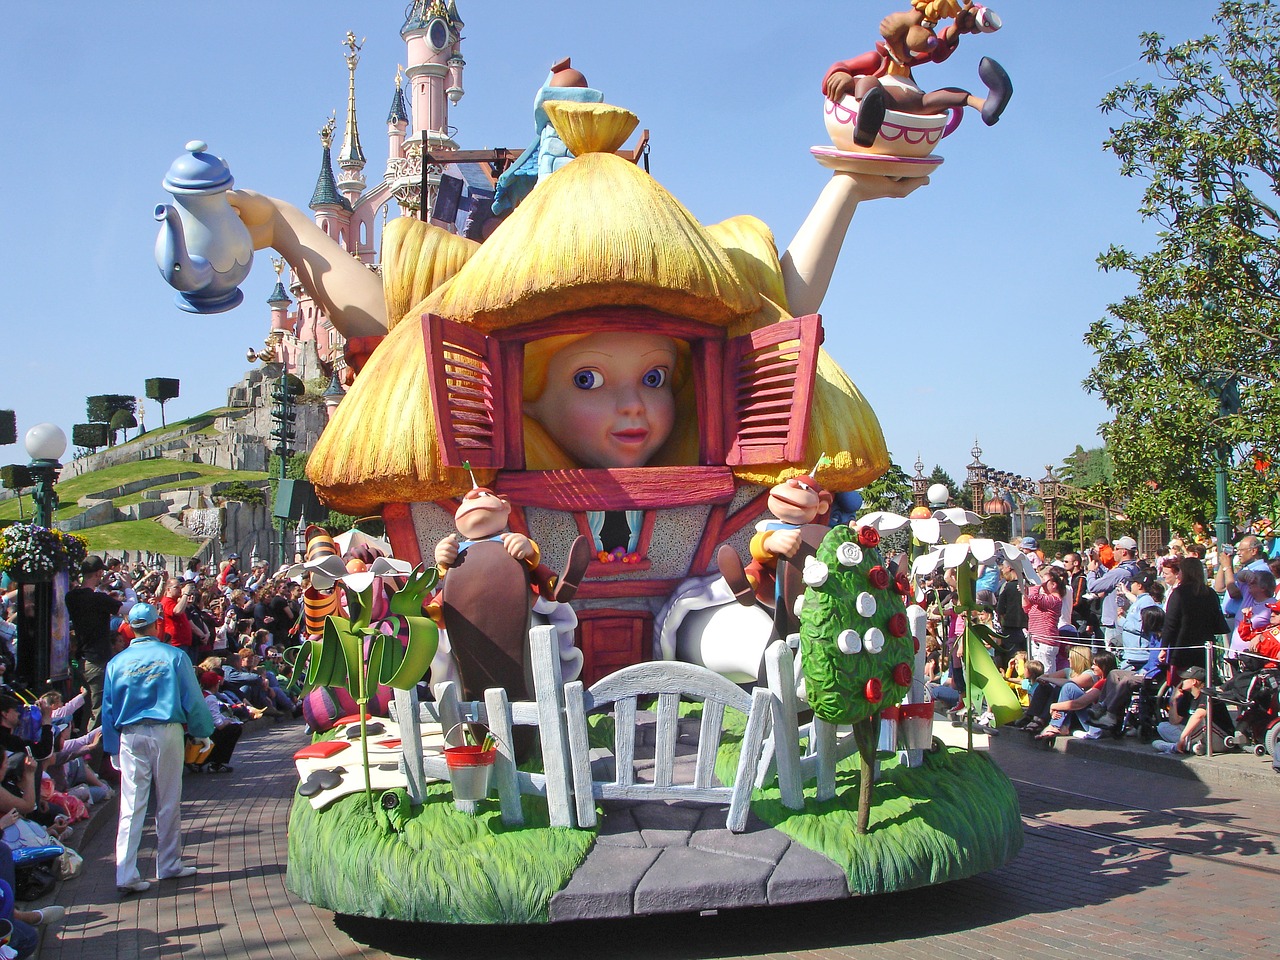 How To Get from Gare du Nord to Disneyland Paris